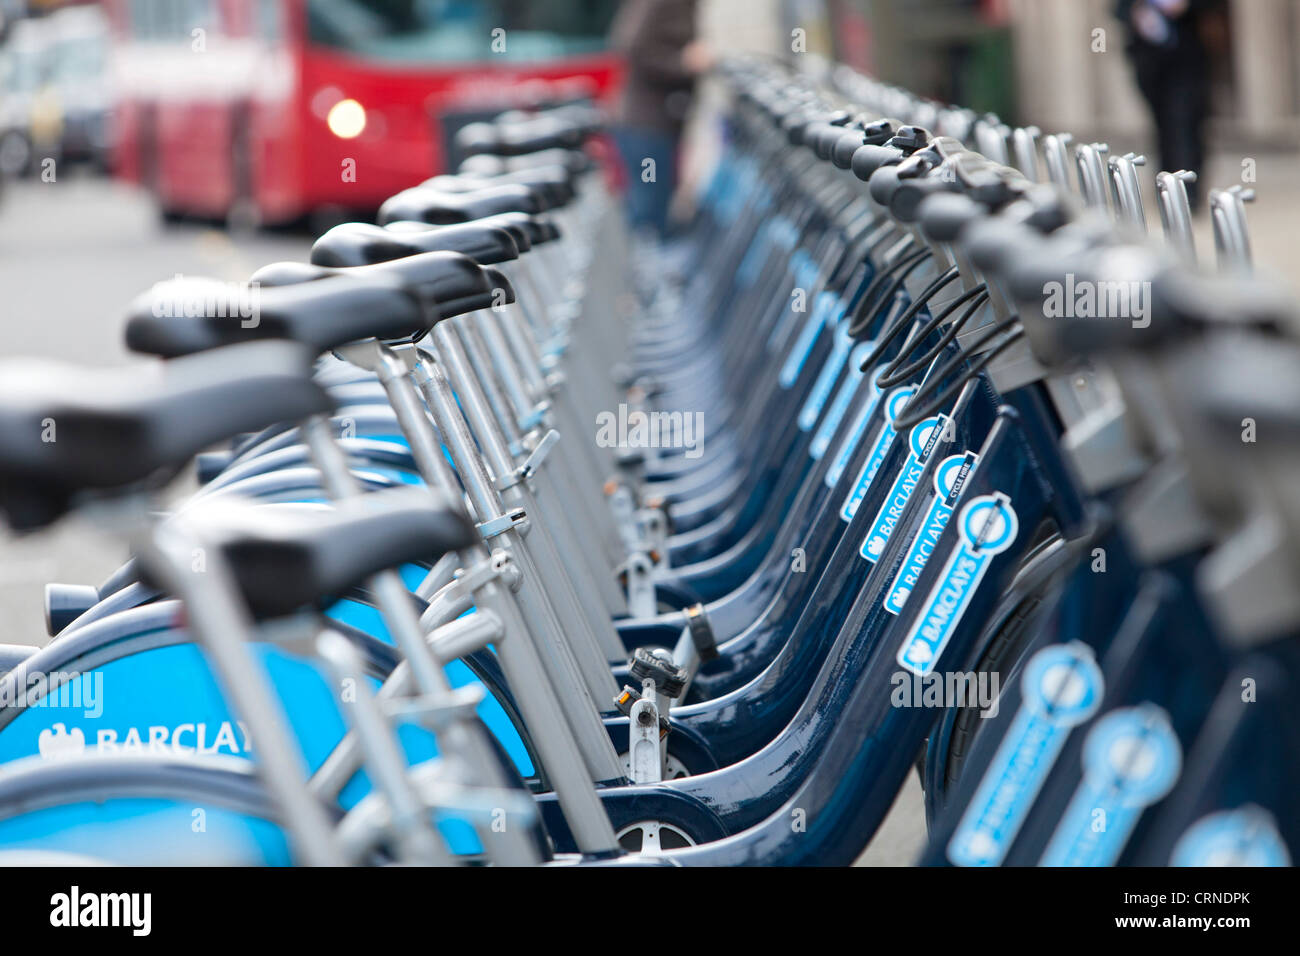 A row of Barclays Cycle hire scheme bikes in a docking station. Stock Photo